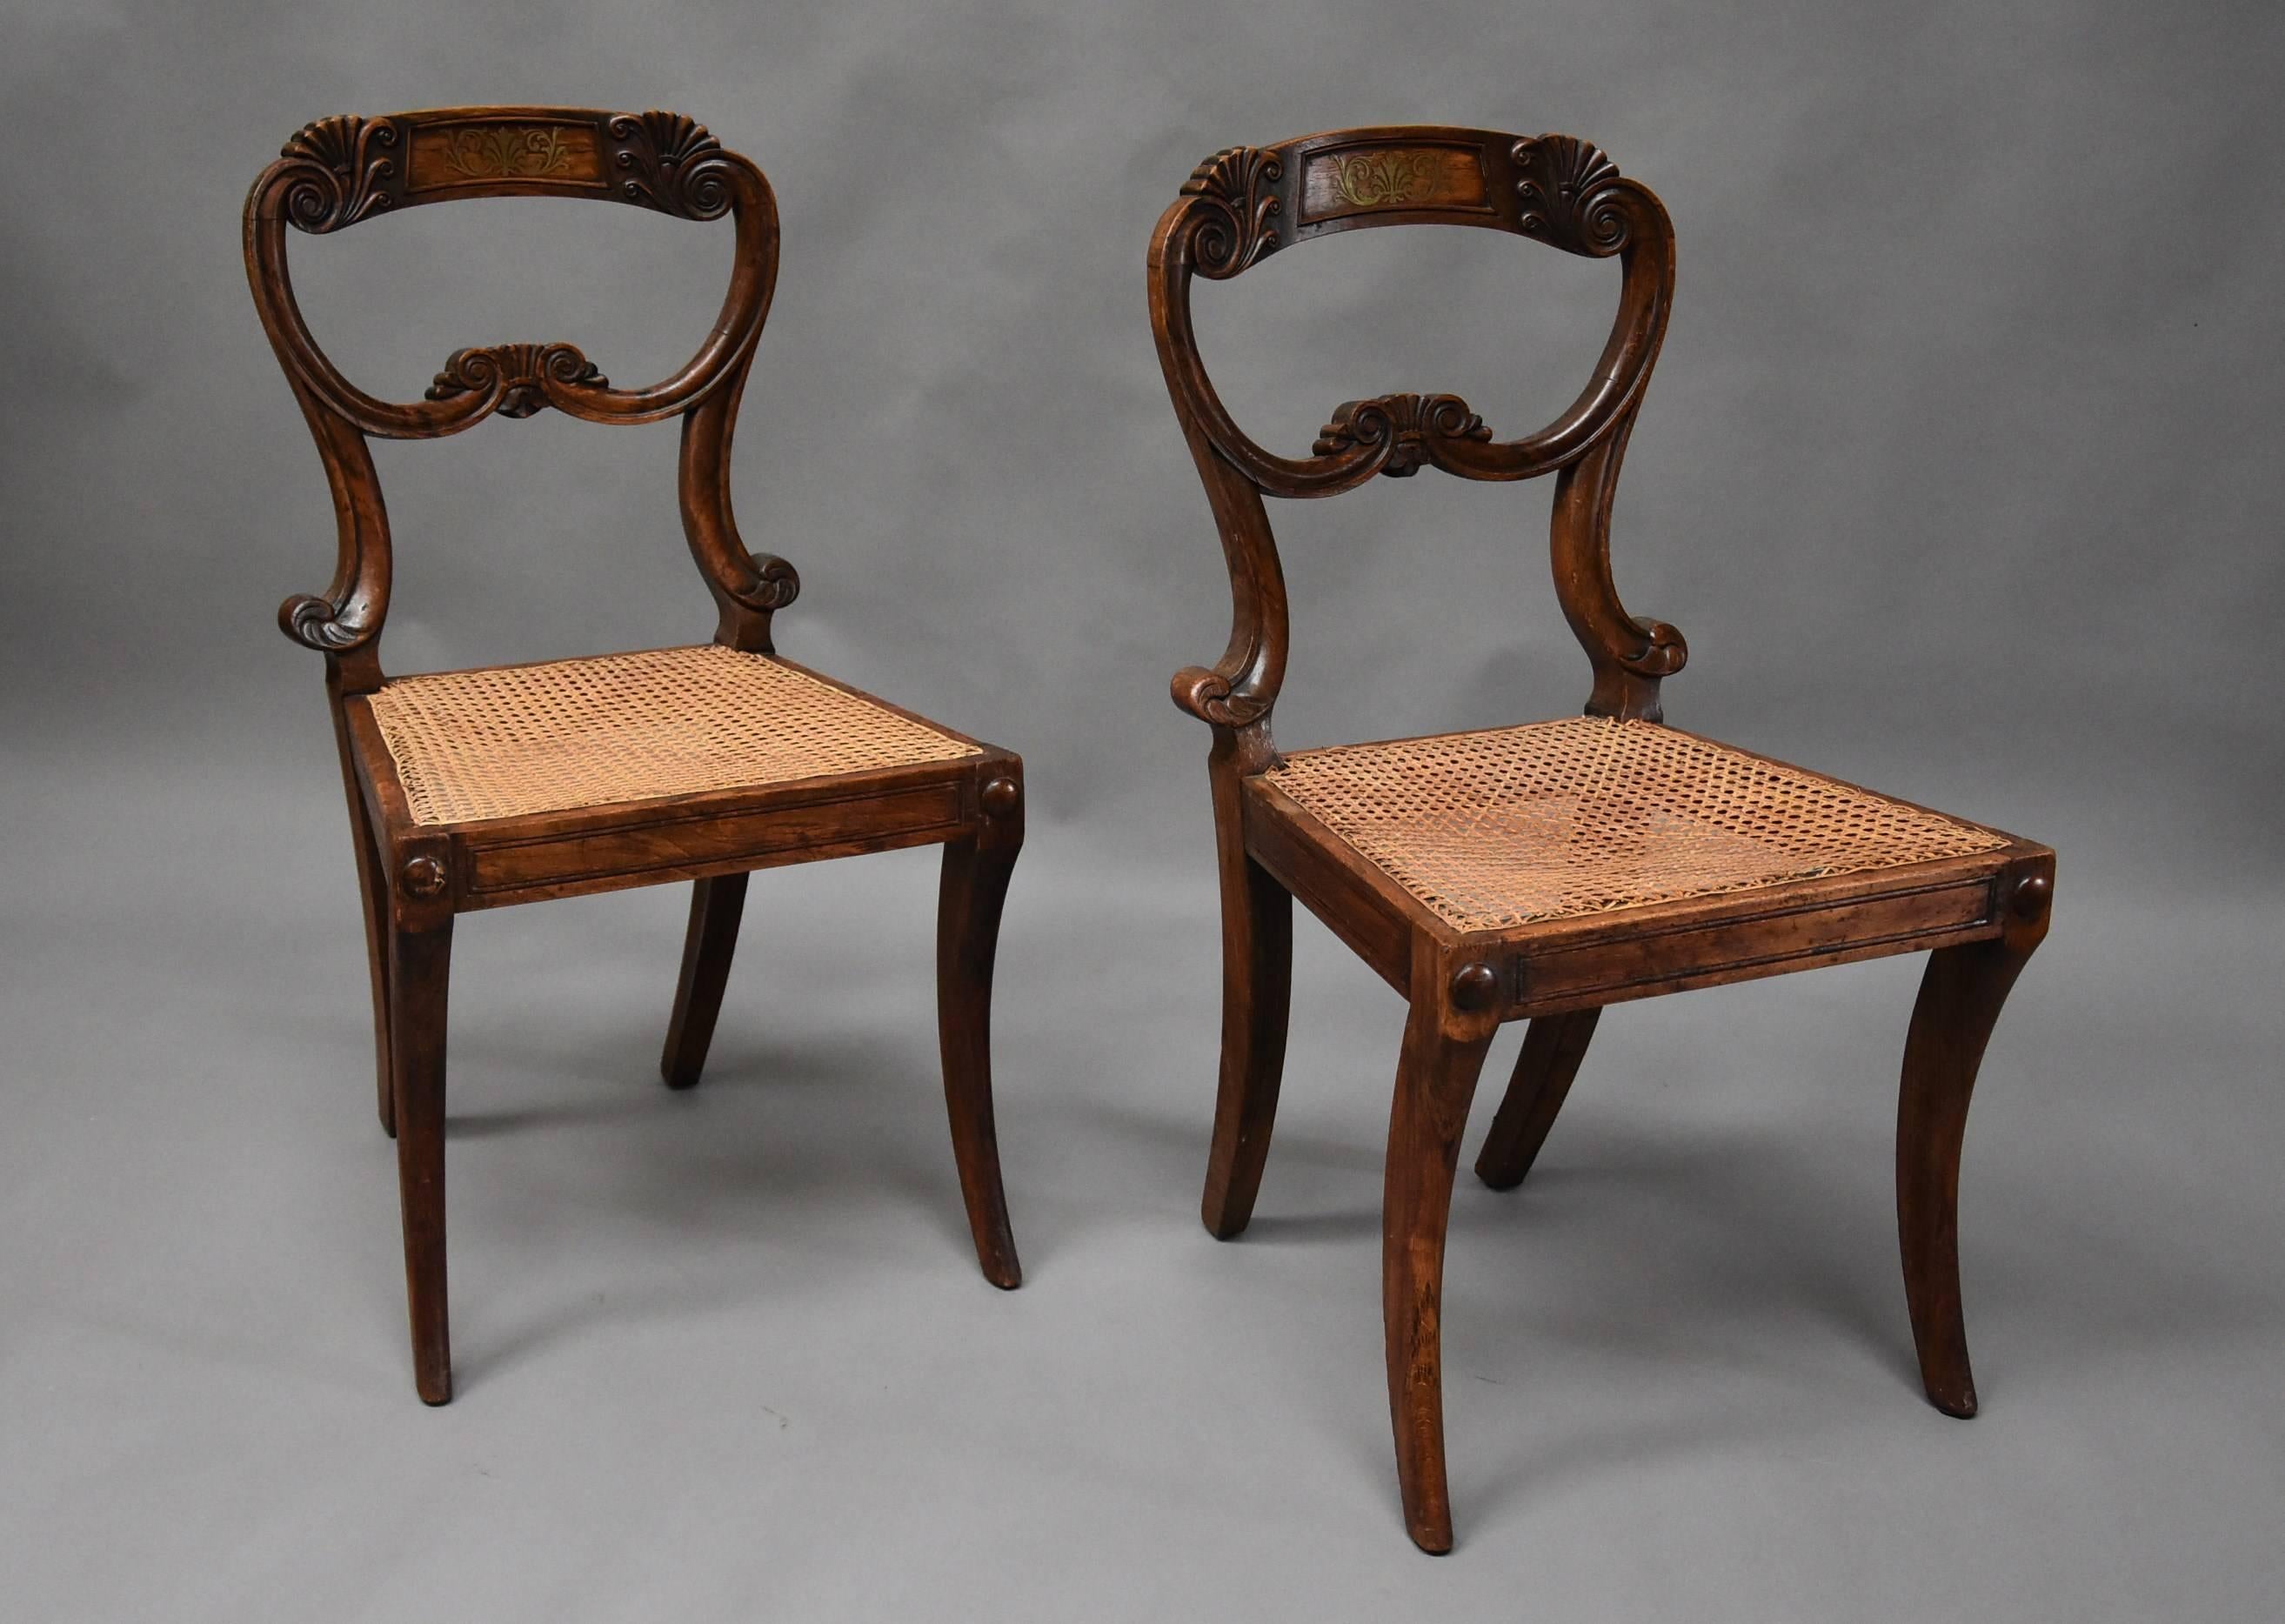 Pair of 19th Century Simulated Rosewood Regency Chairs in the Manner of Gillows 2